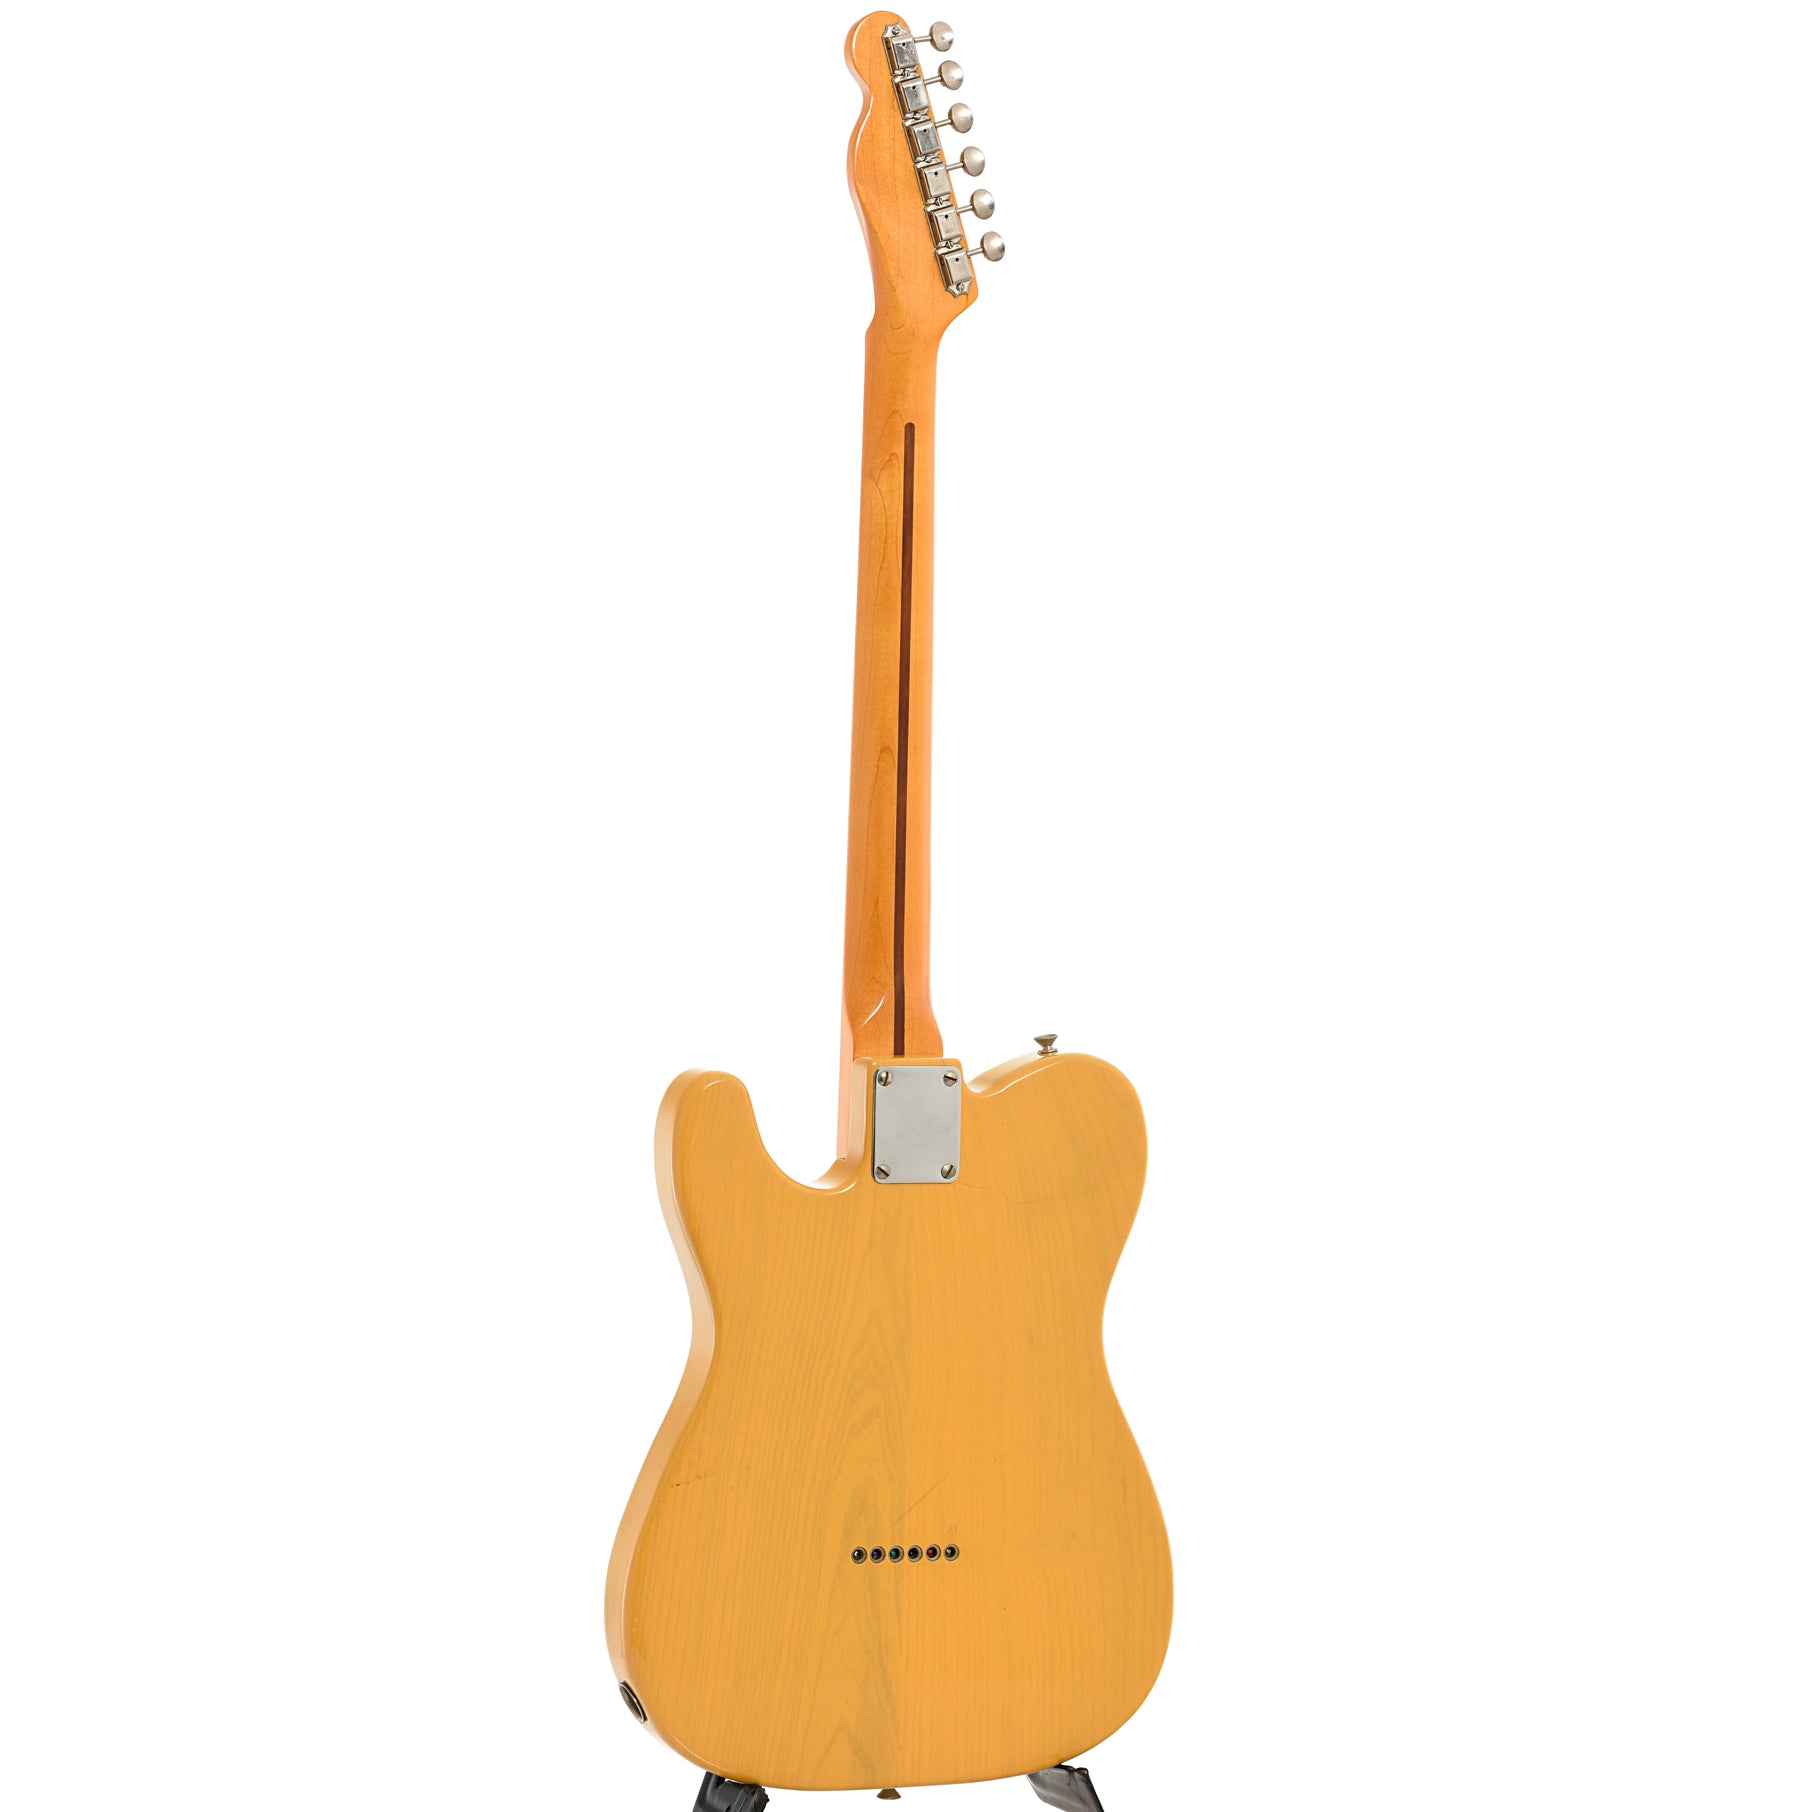 Full back and side of Fender '52 Reissue Telecaster Electric Guitar (1984)